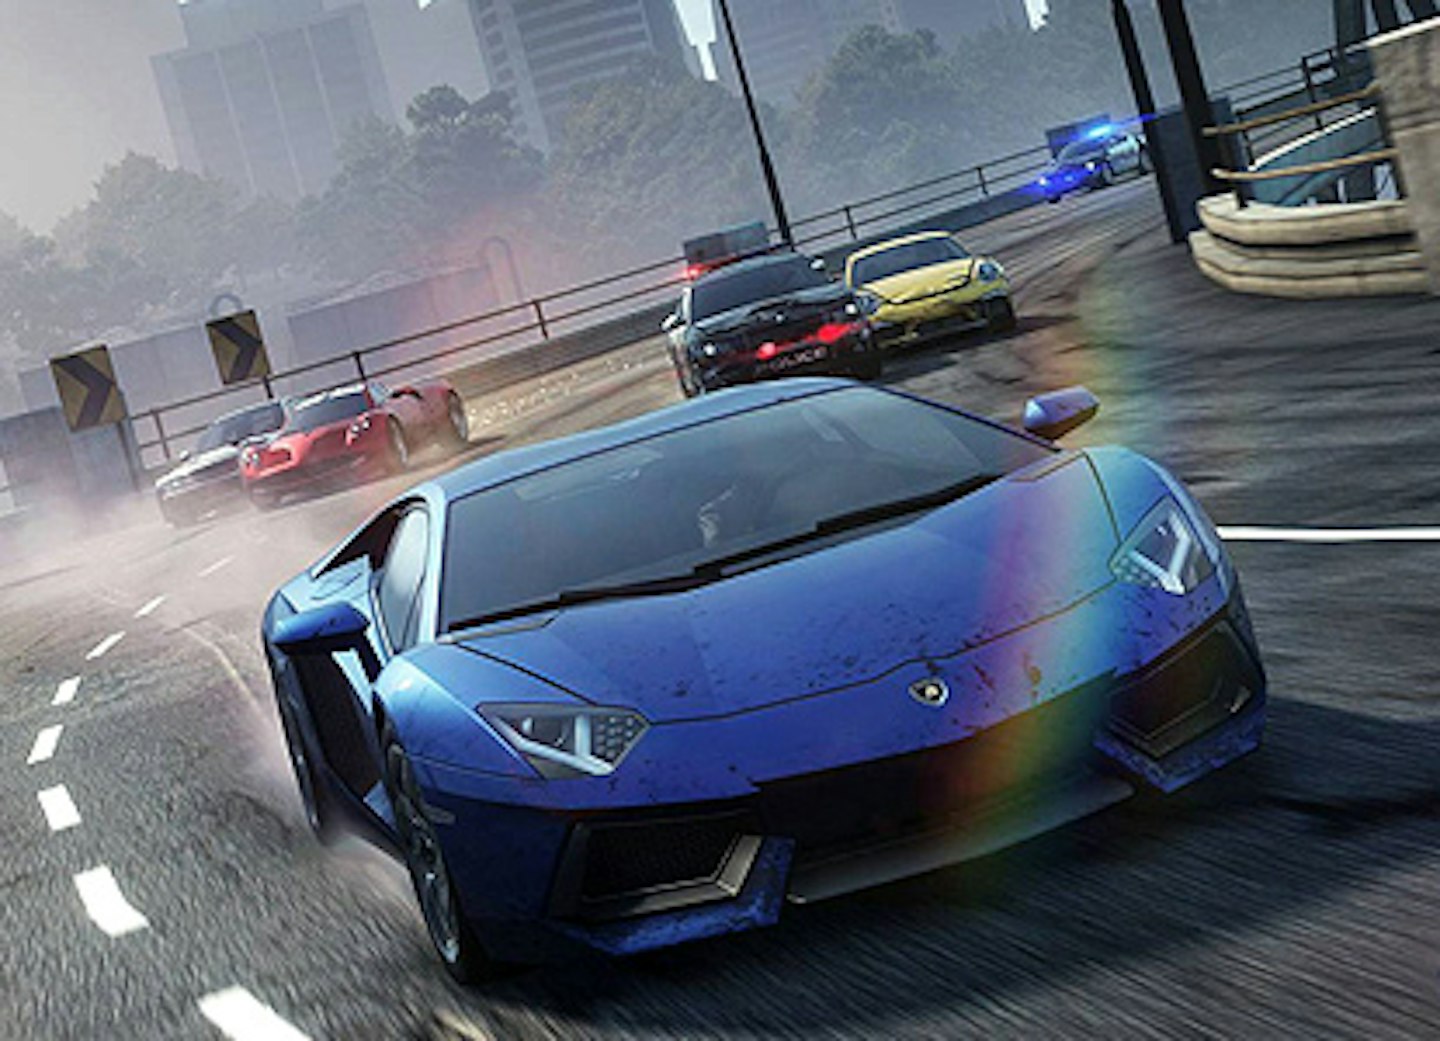 Need for Speed movie: The stunts are real - GameSpot